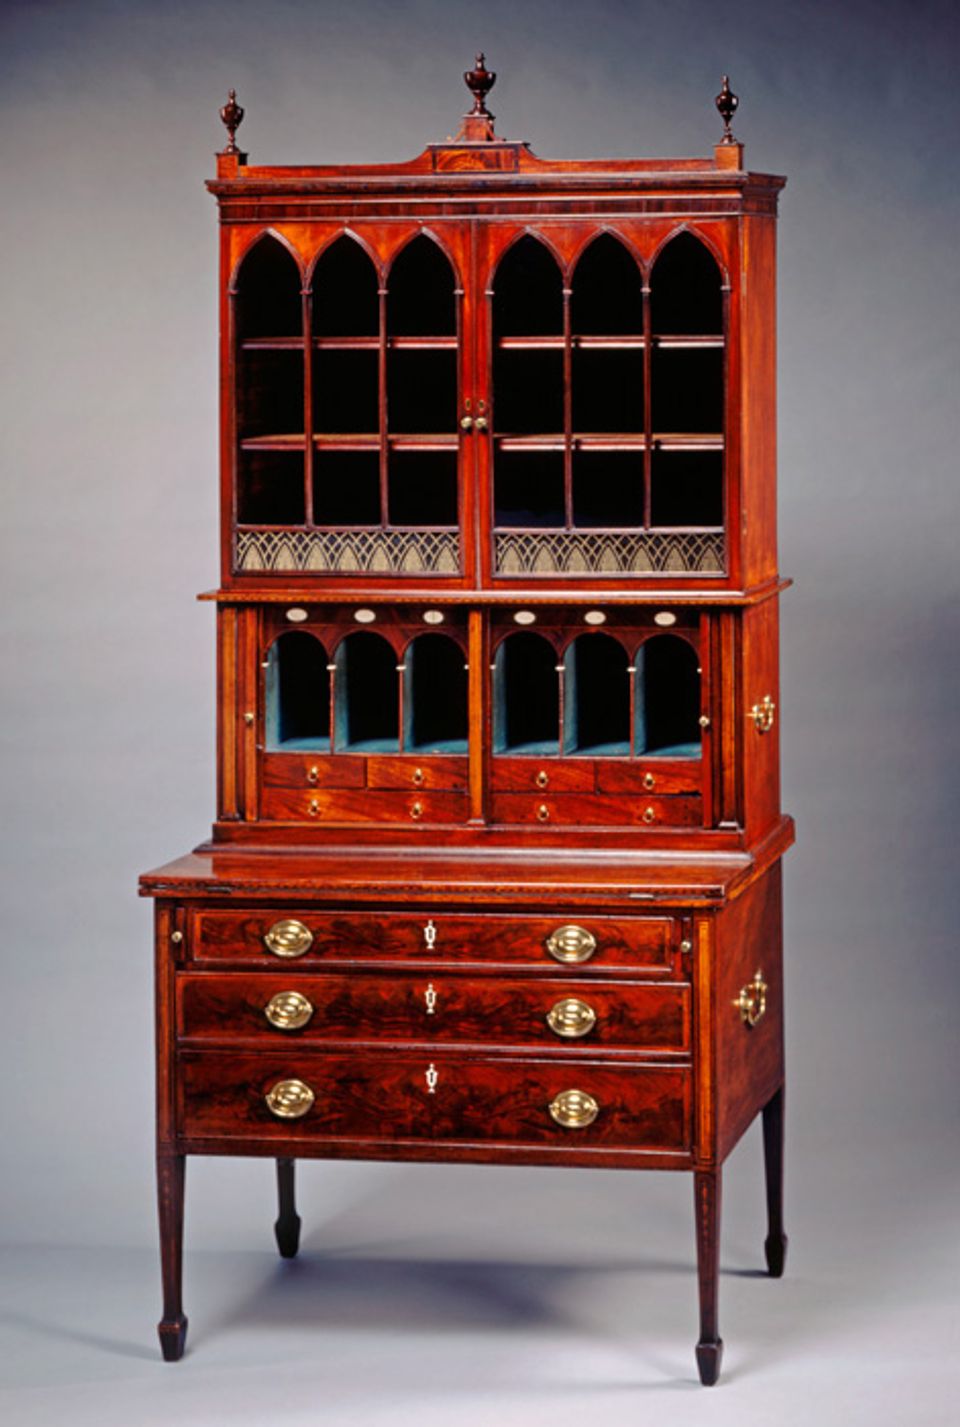 An image of a Thomas Seymour's desk and bookcase made from mahogany.